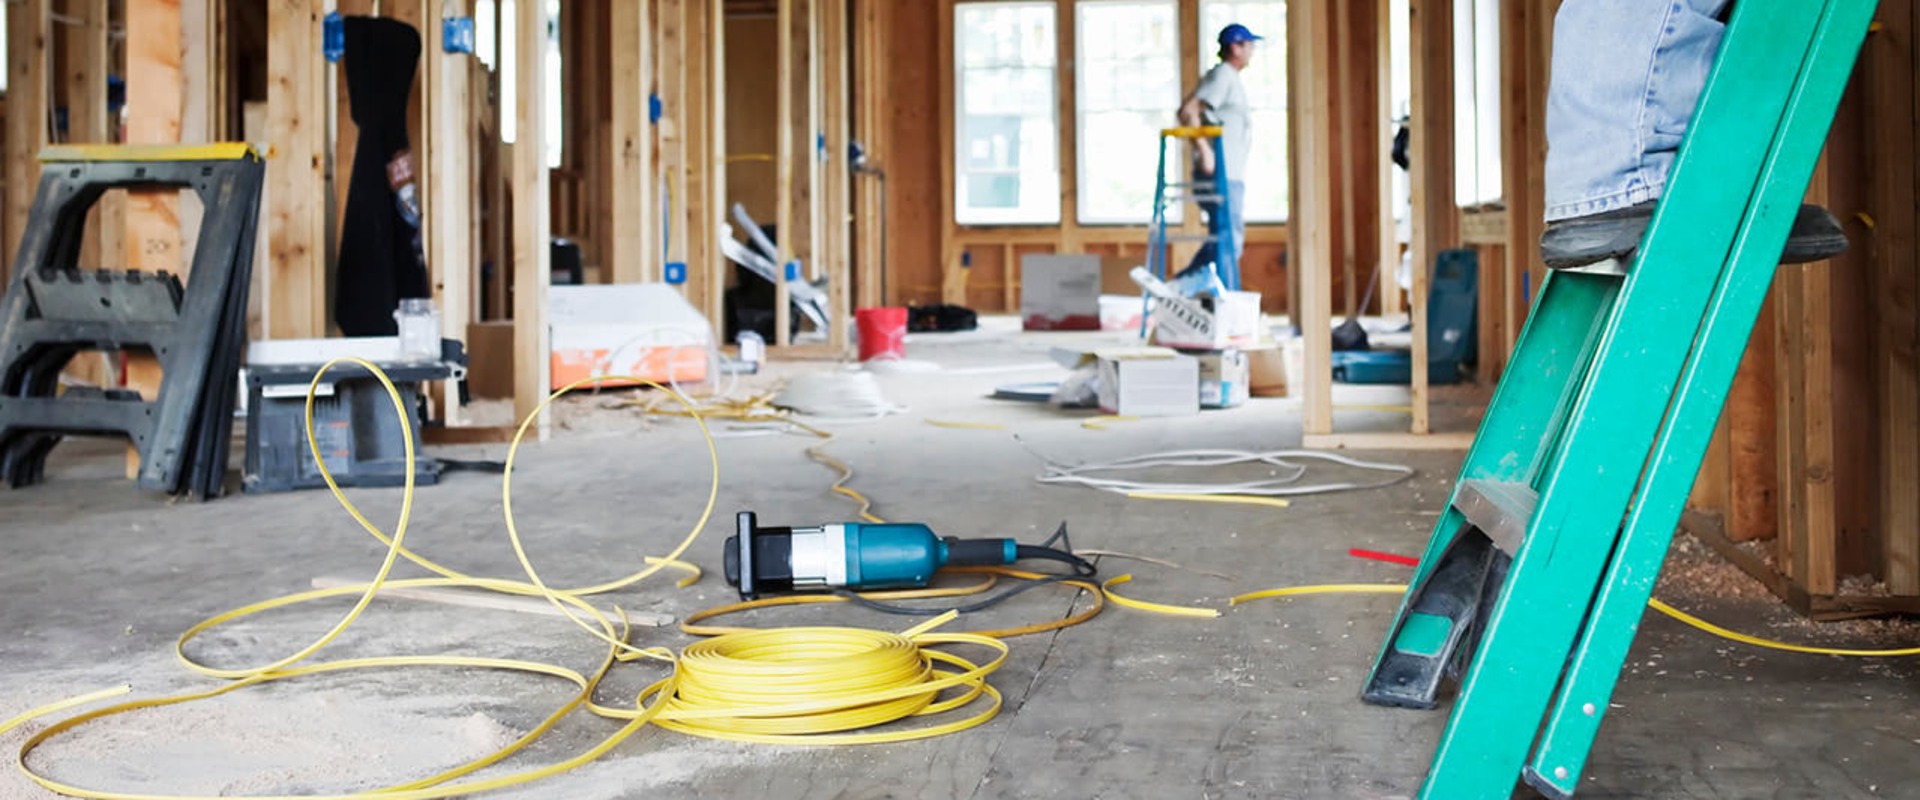 How Much Does a Full House Renovation Cost?